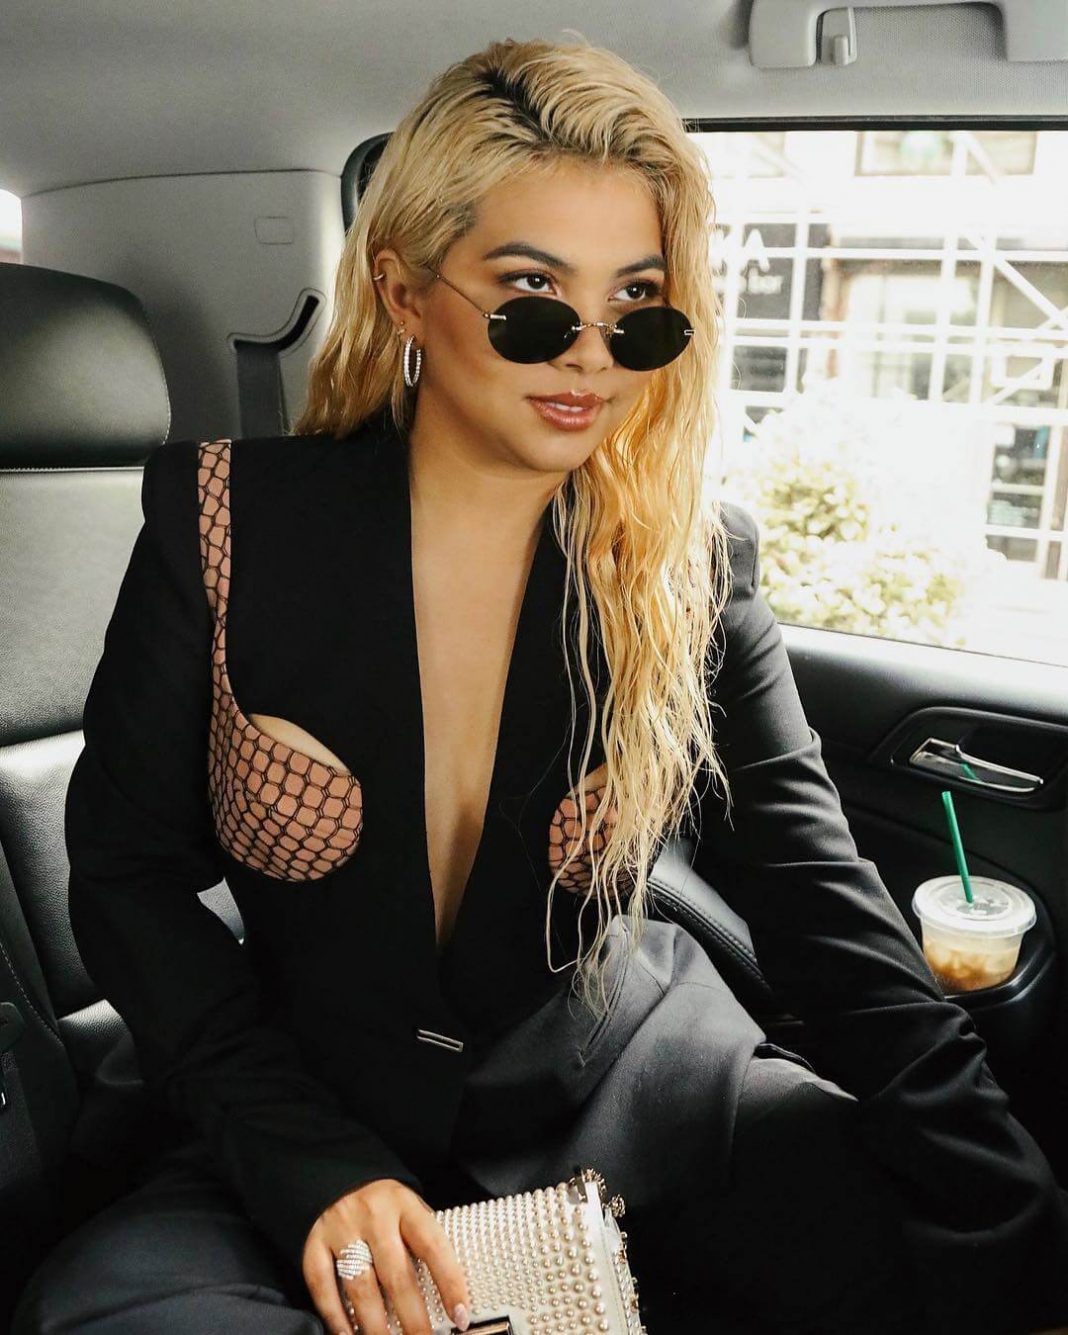 49 Hayley Kiyoko Nude Pictures Which Makes Her An Enigmatic Glamor Quotient 22